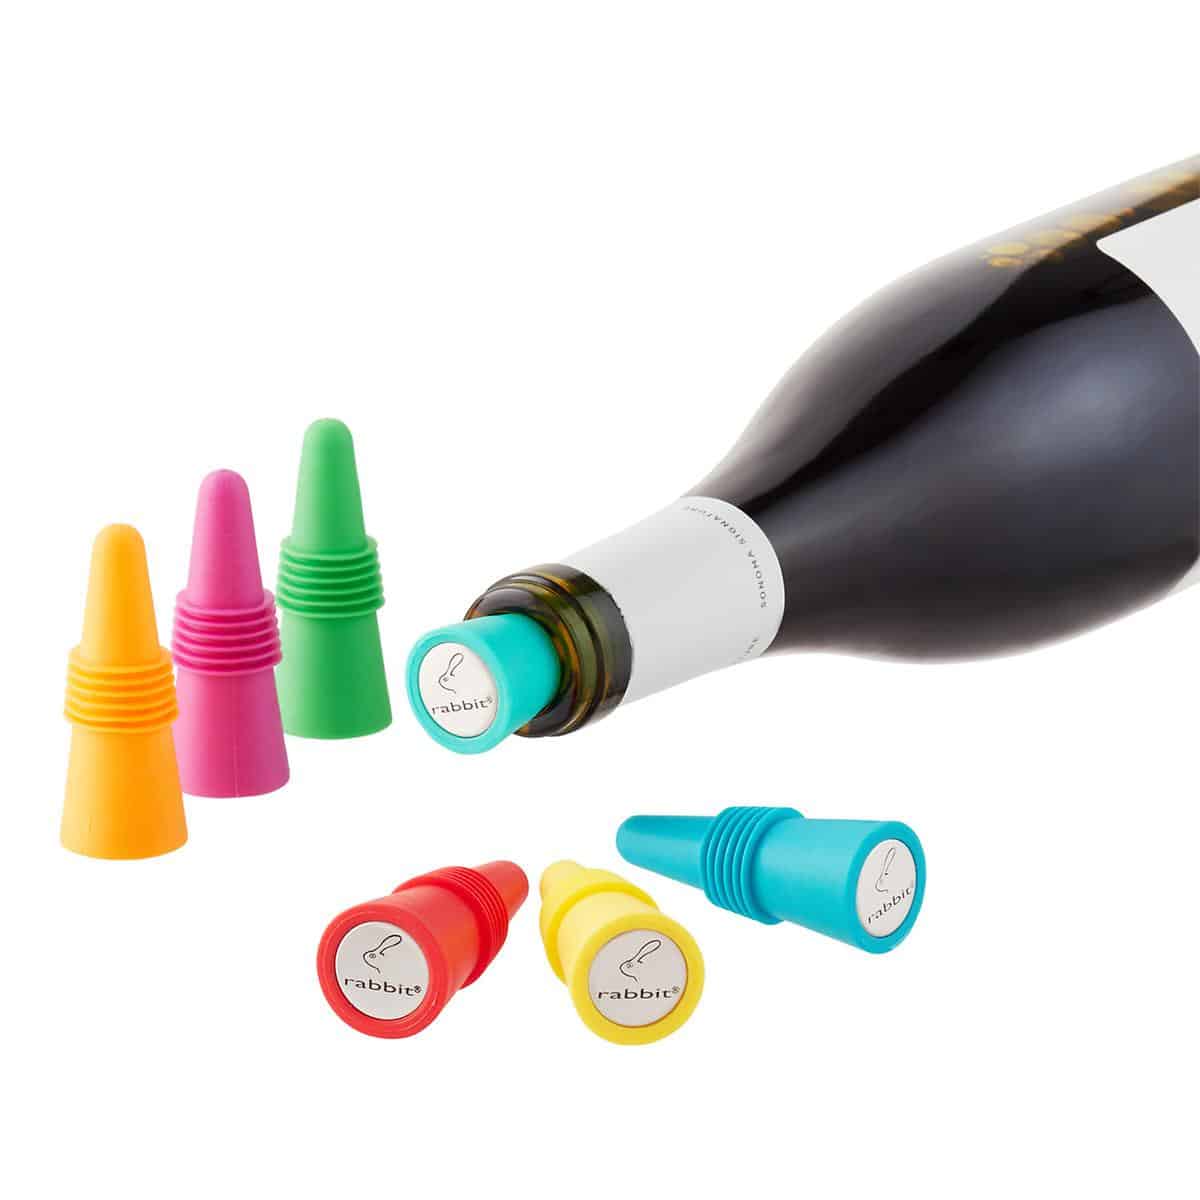 Unique Wine Stoppers To Preserve Your Best Bottles On This Holiday Season